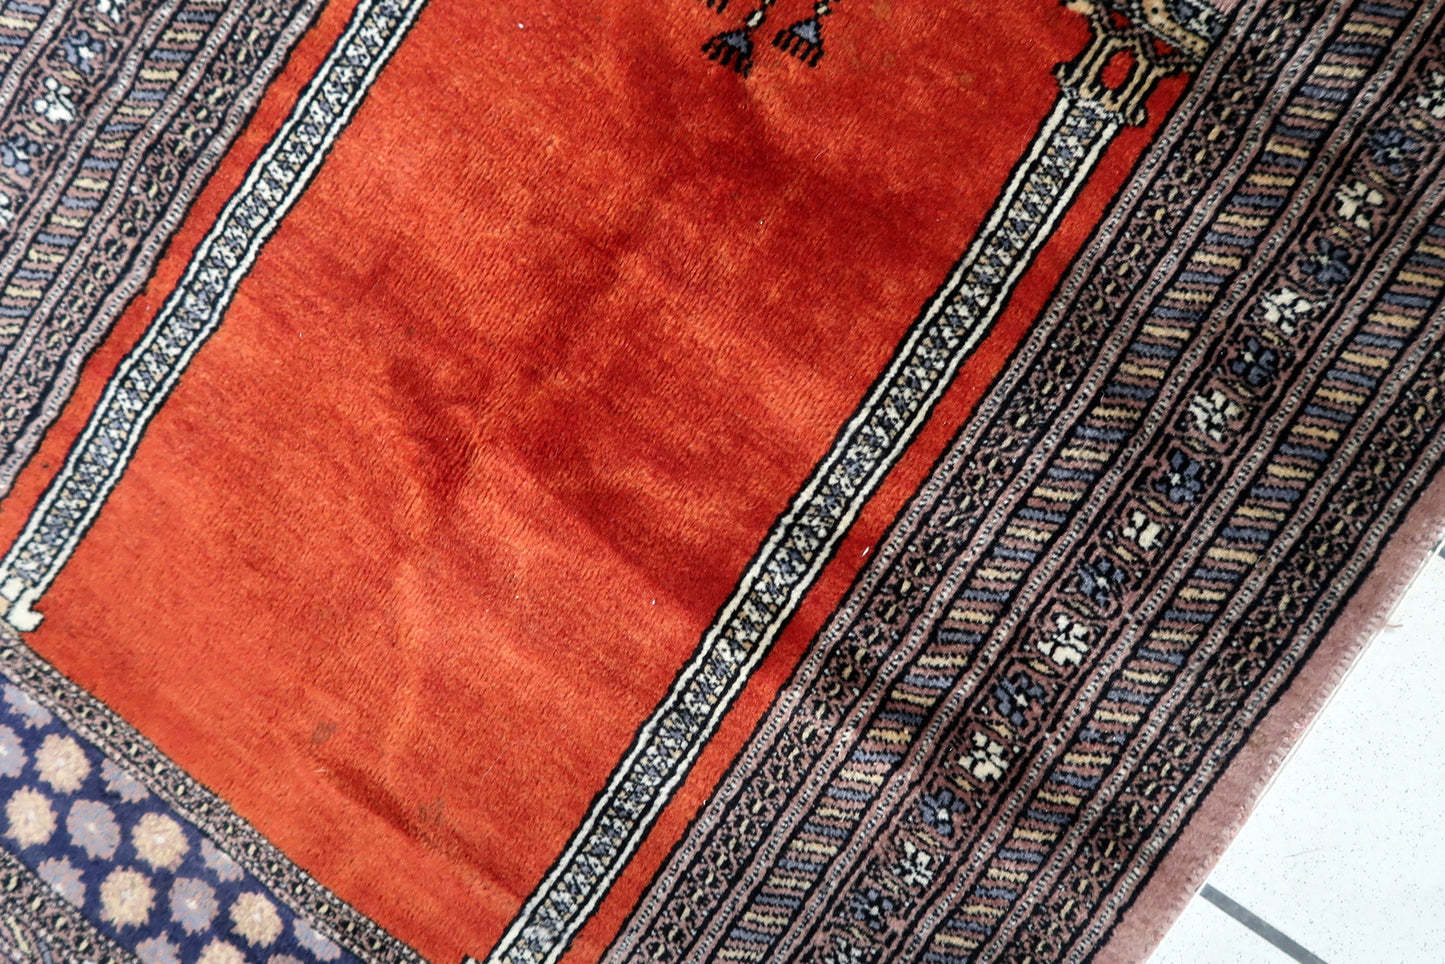 Detailed view of the multiple layers of borders surrounding the central area of the rug